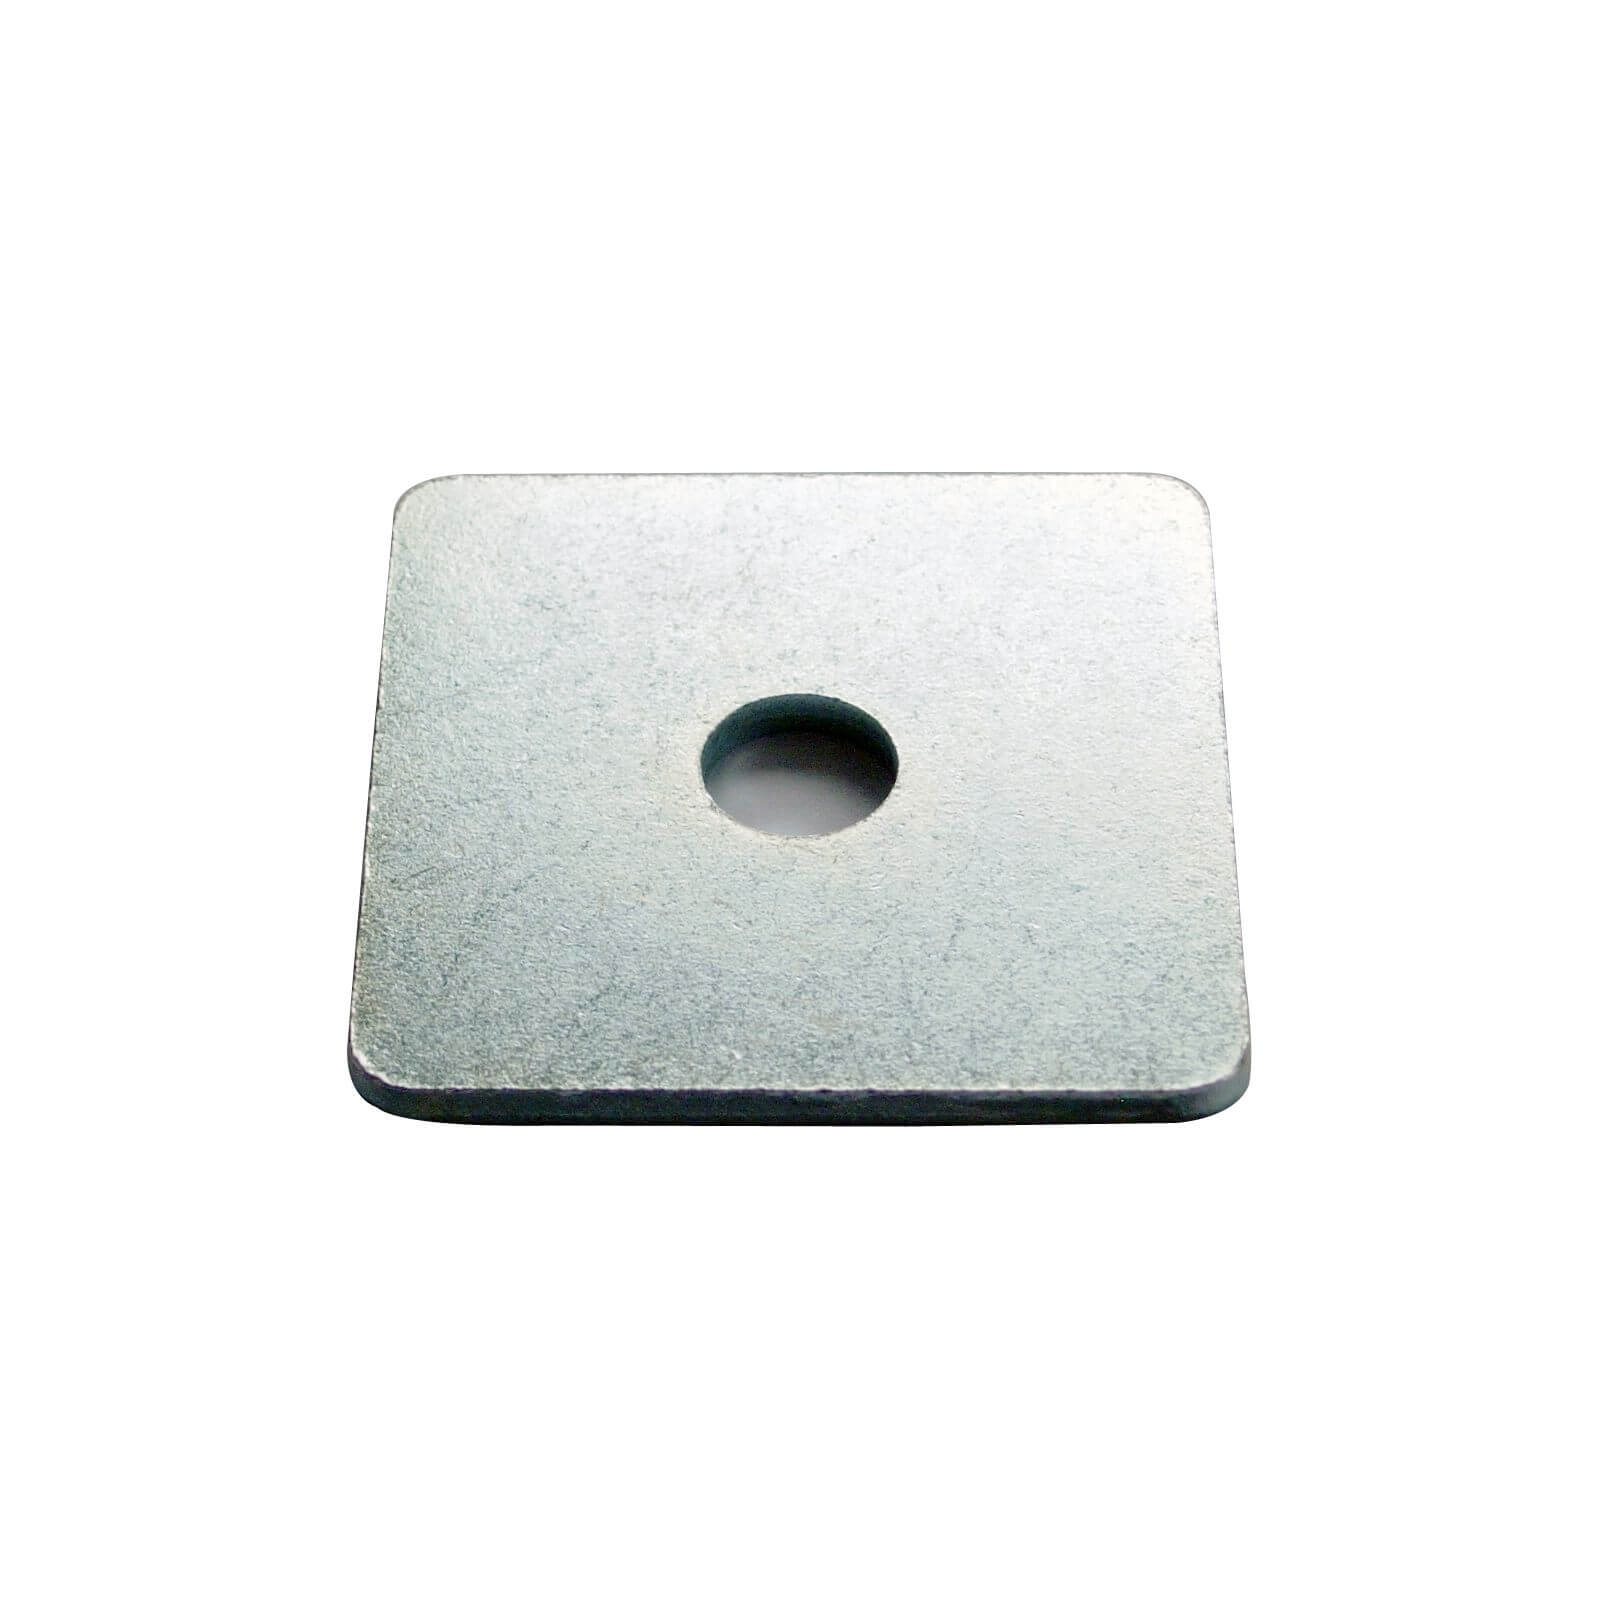 Square Plated Wasther - Bright Zinc Plated - (12 -50mm) - 4 Pack